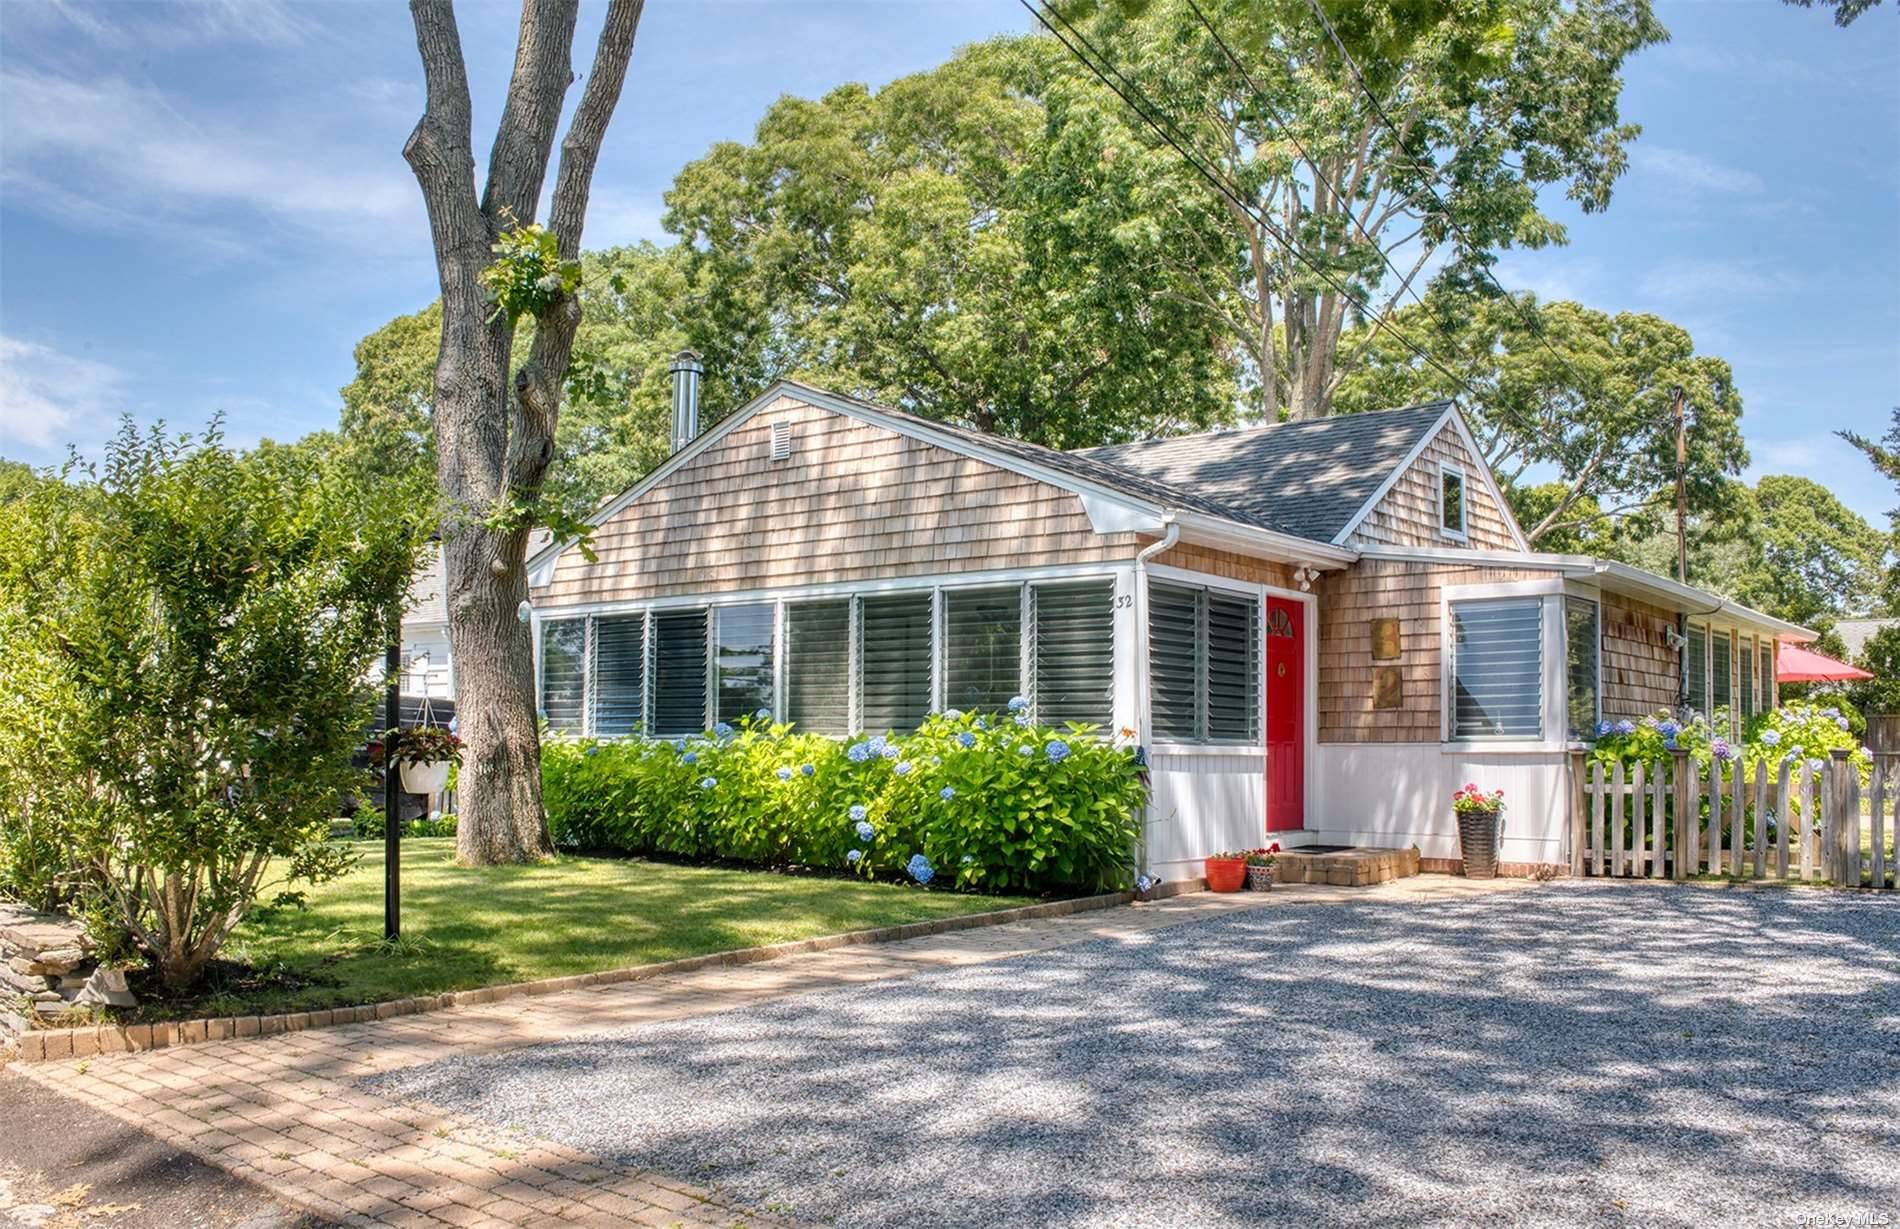 Gracious cottage in the heart of Pine Neck.